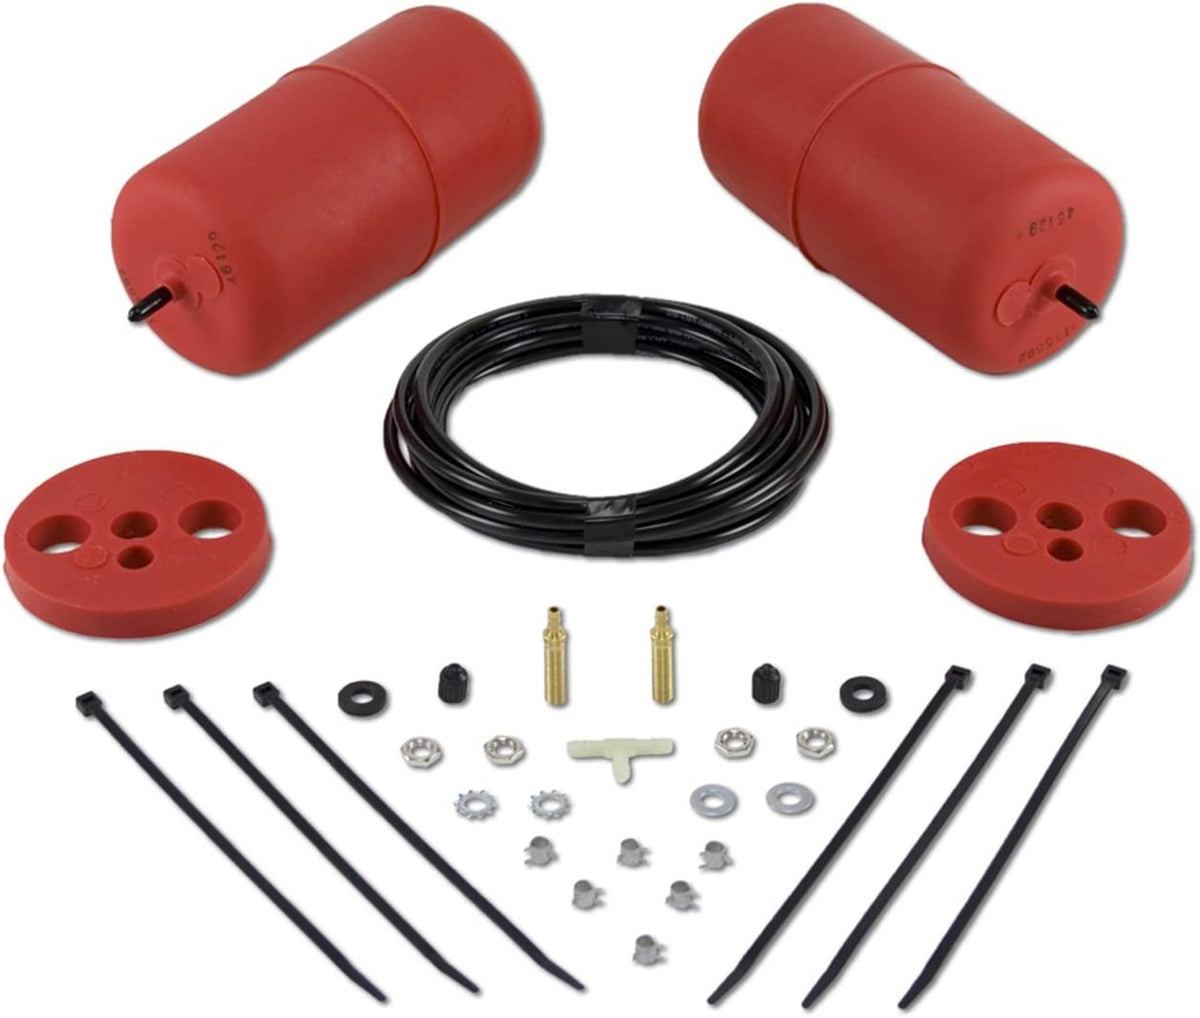 Air Lift 60797 1000 Series Rear Air Spring Kit For Buick, Oldsmobile, Chevrolet and More